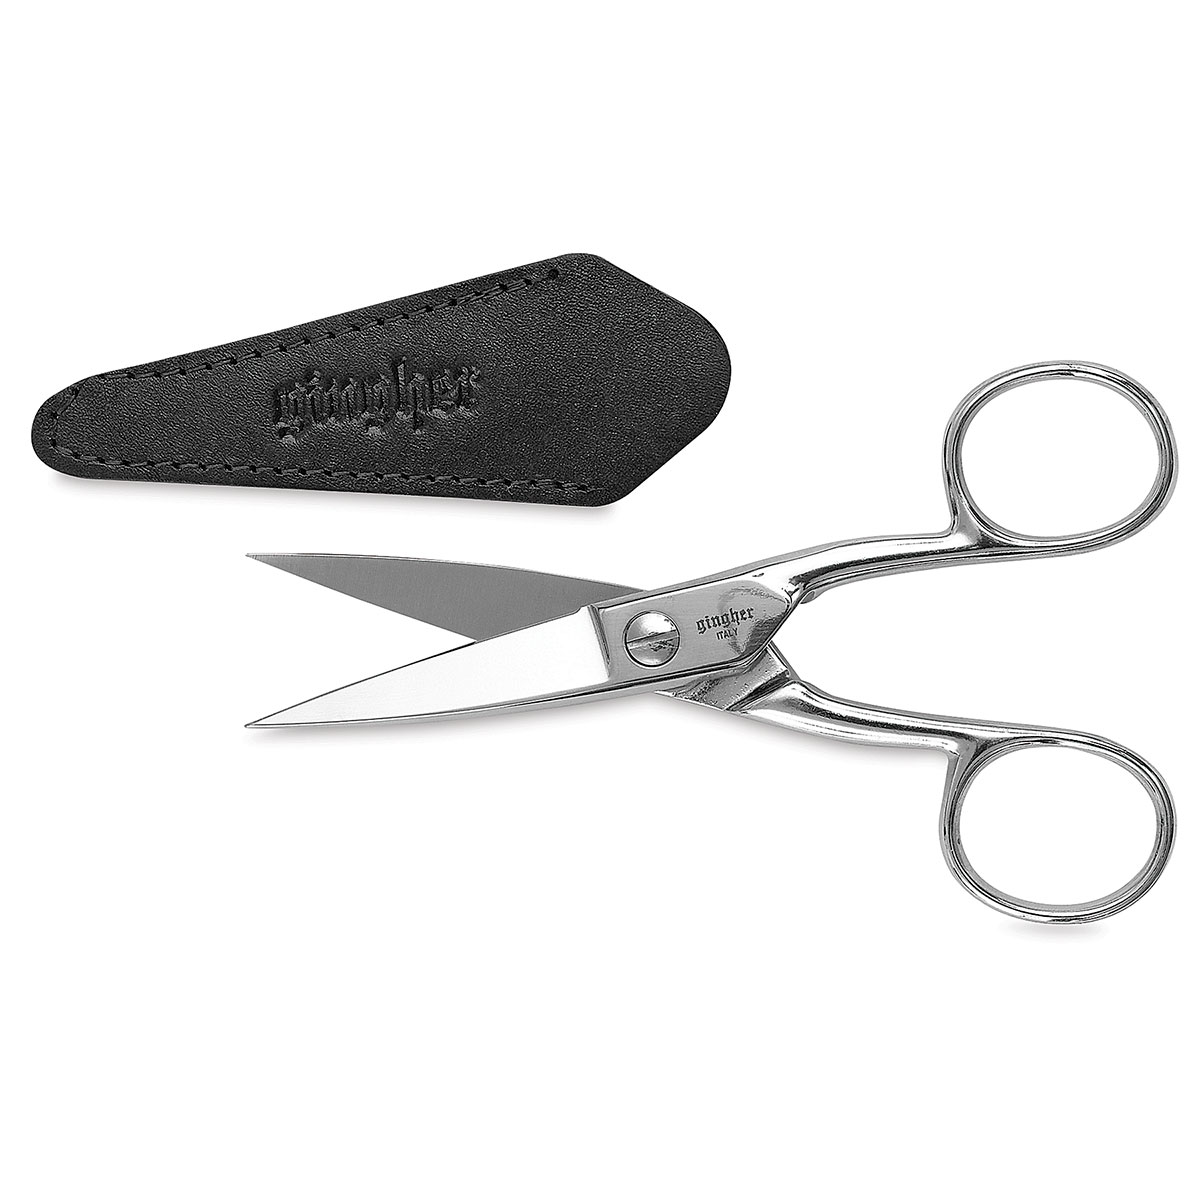 Gingher Shears and Scissors